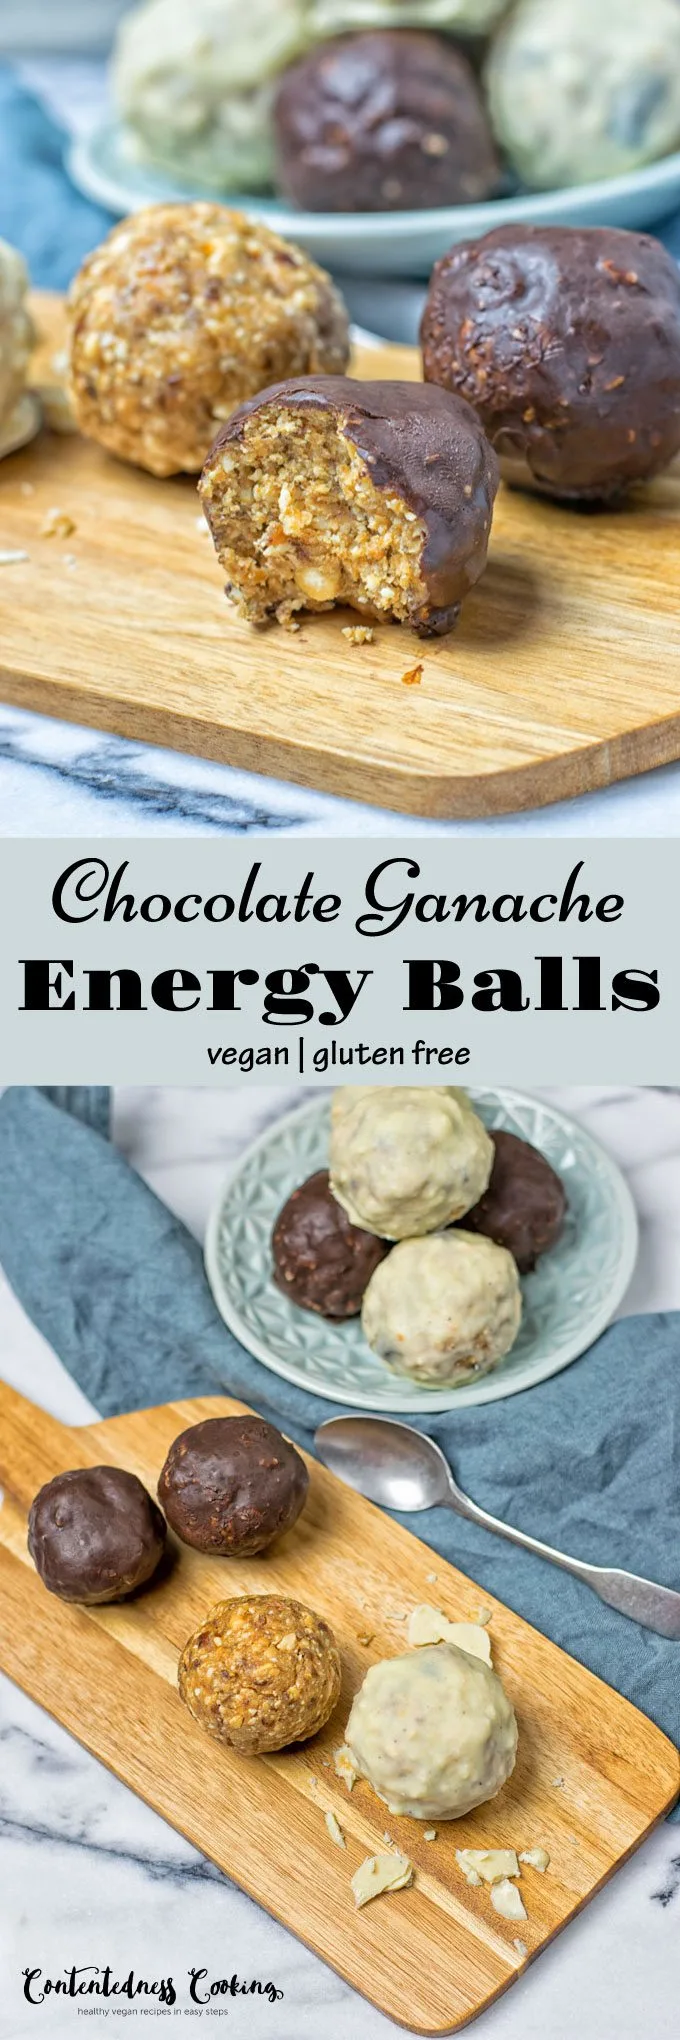 Collage of two pictures of Chocolate Ganache Energy Balls with recipe title text.